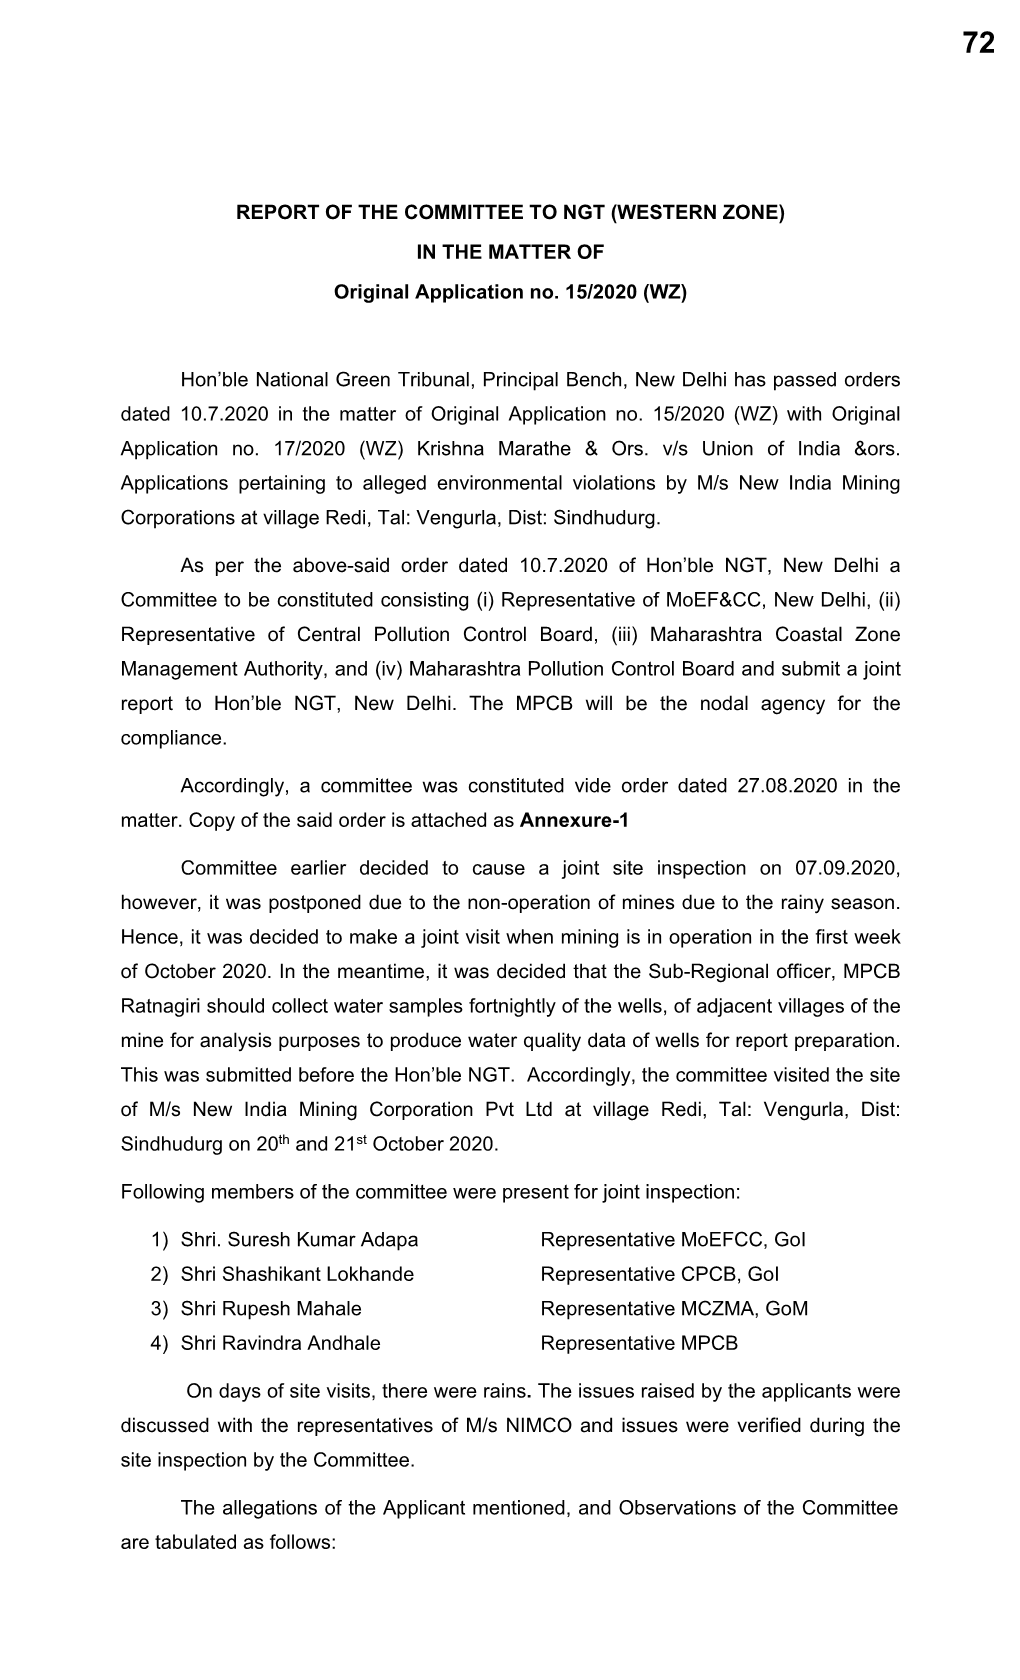 REPORT of the COMMITTEE to NGT (WESTERN ZONE) in the MATTER of Original Application No